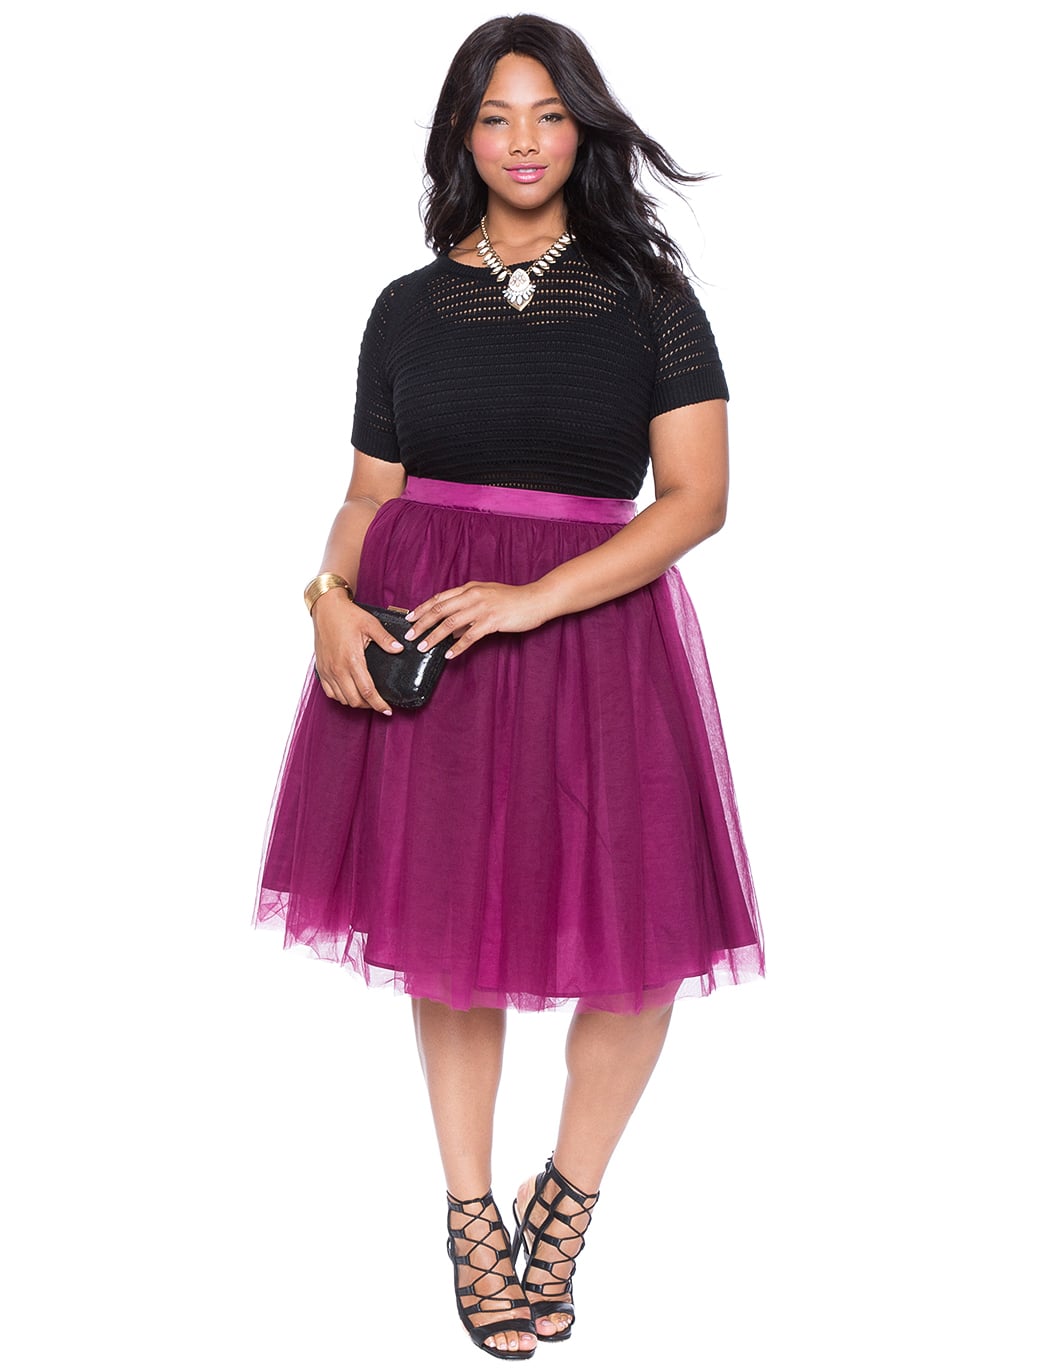 The Tulle Skirt | 4 Plus-Size Bloggers Are About to Show You the Skirt That Flatters Everyone | POPSUGAR Fashion Photo 2